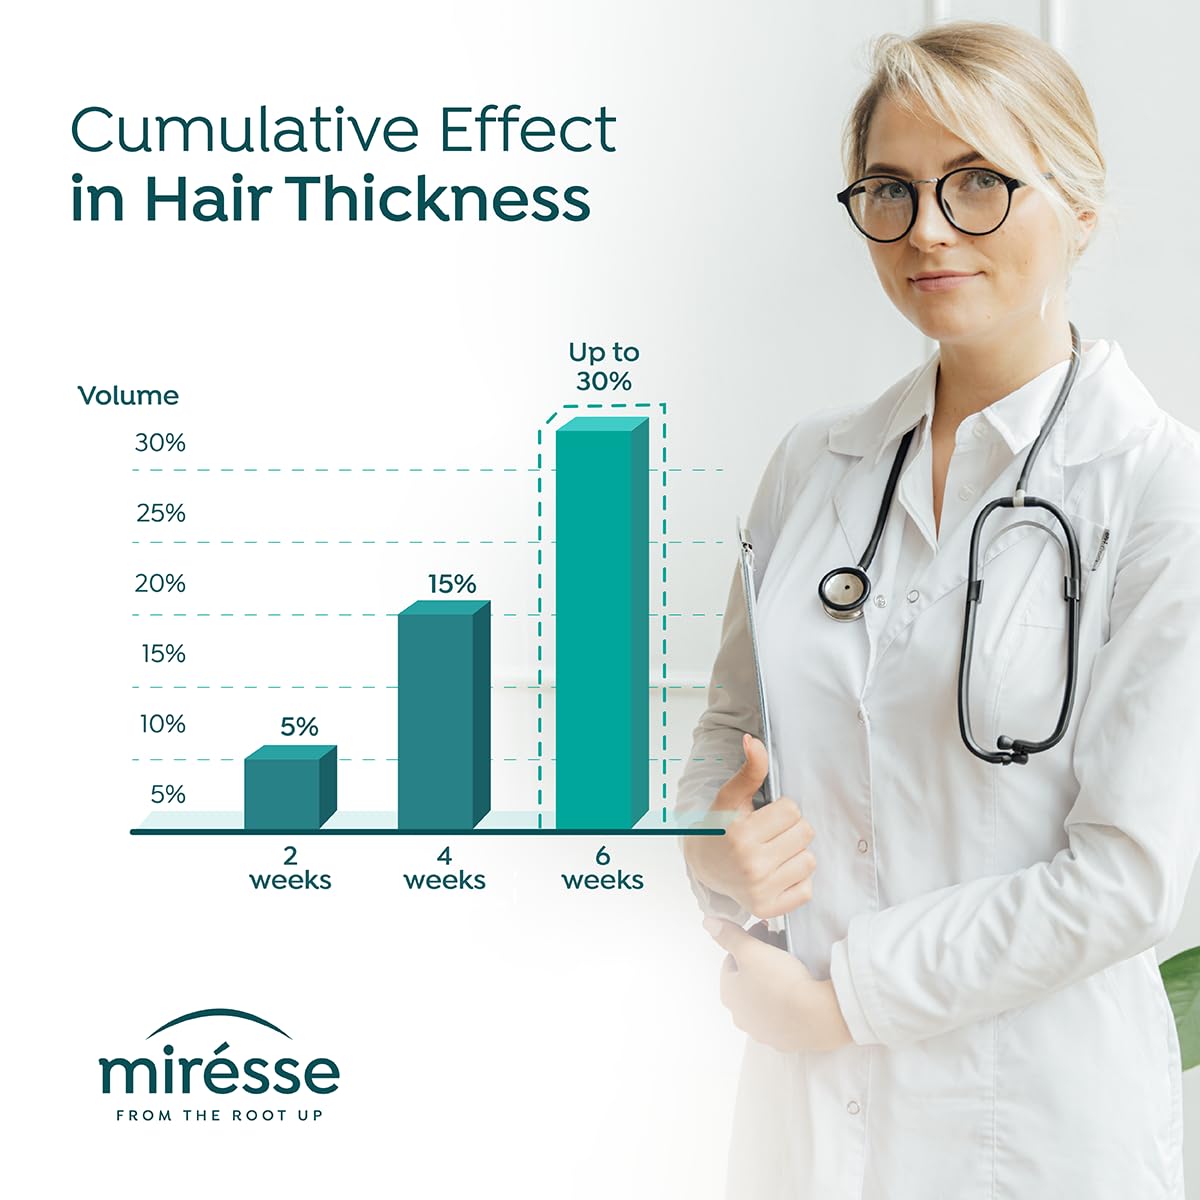 MIRESSE Thickening and Hydrating Conditioner with Hyaluronic Acid, Biotin & Menthol For Men & Women - For Fine and Thin Hair. Clinically Proven Thicker Strands on Continuous Use - 16.9oz (500ml)